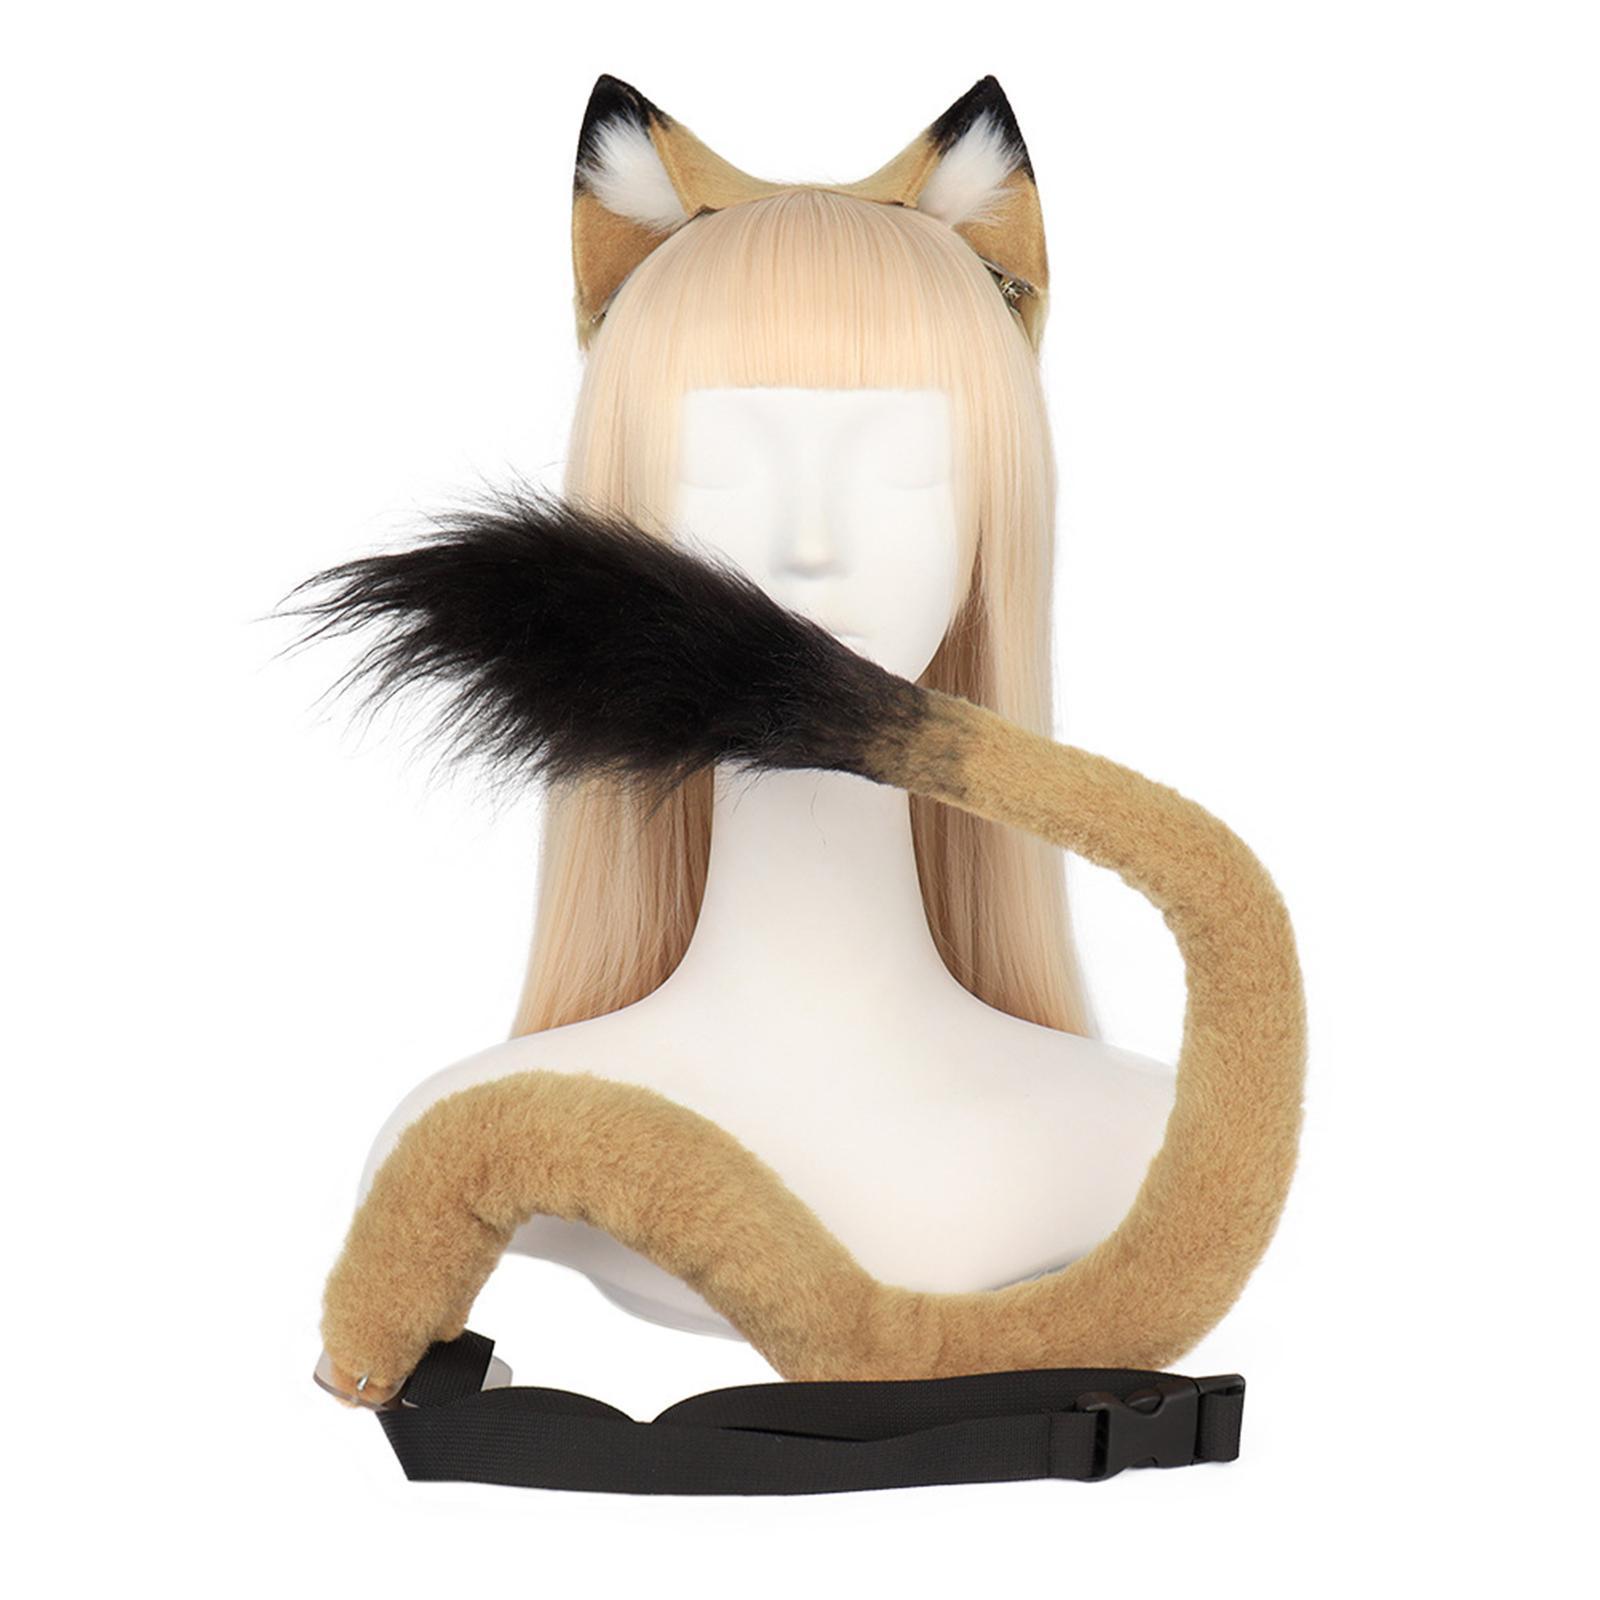 Lion Ear and Tail Set for Women Girls Lolita Cosplay for Costume Accessory